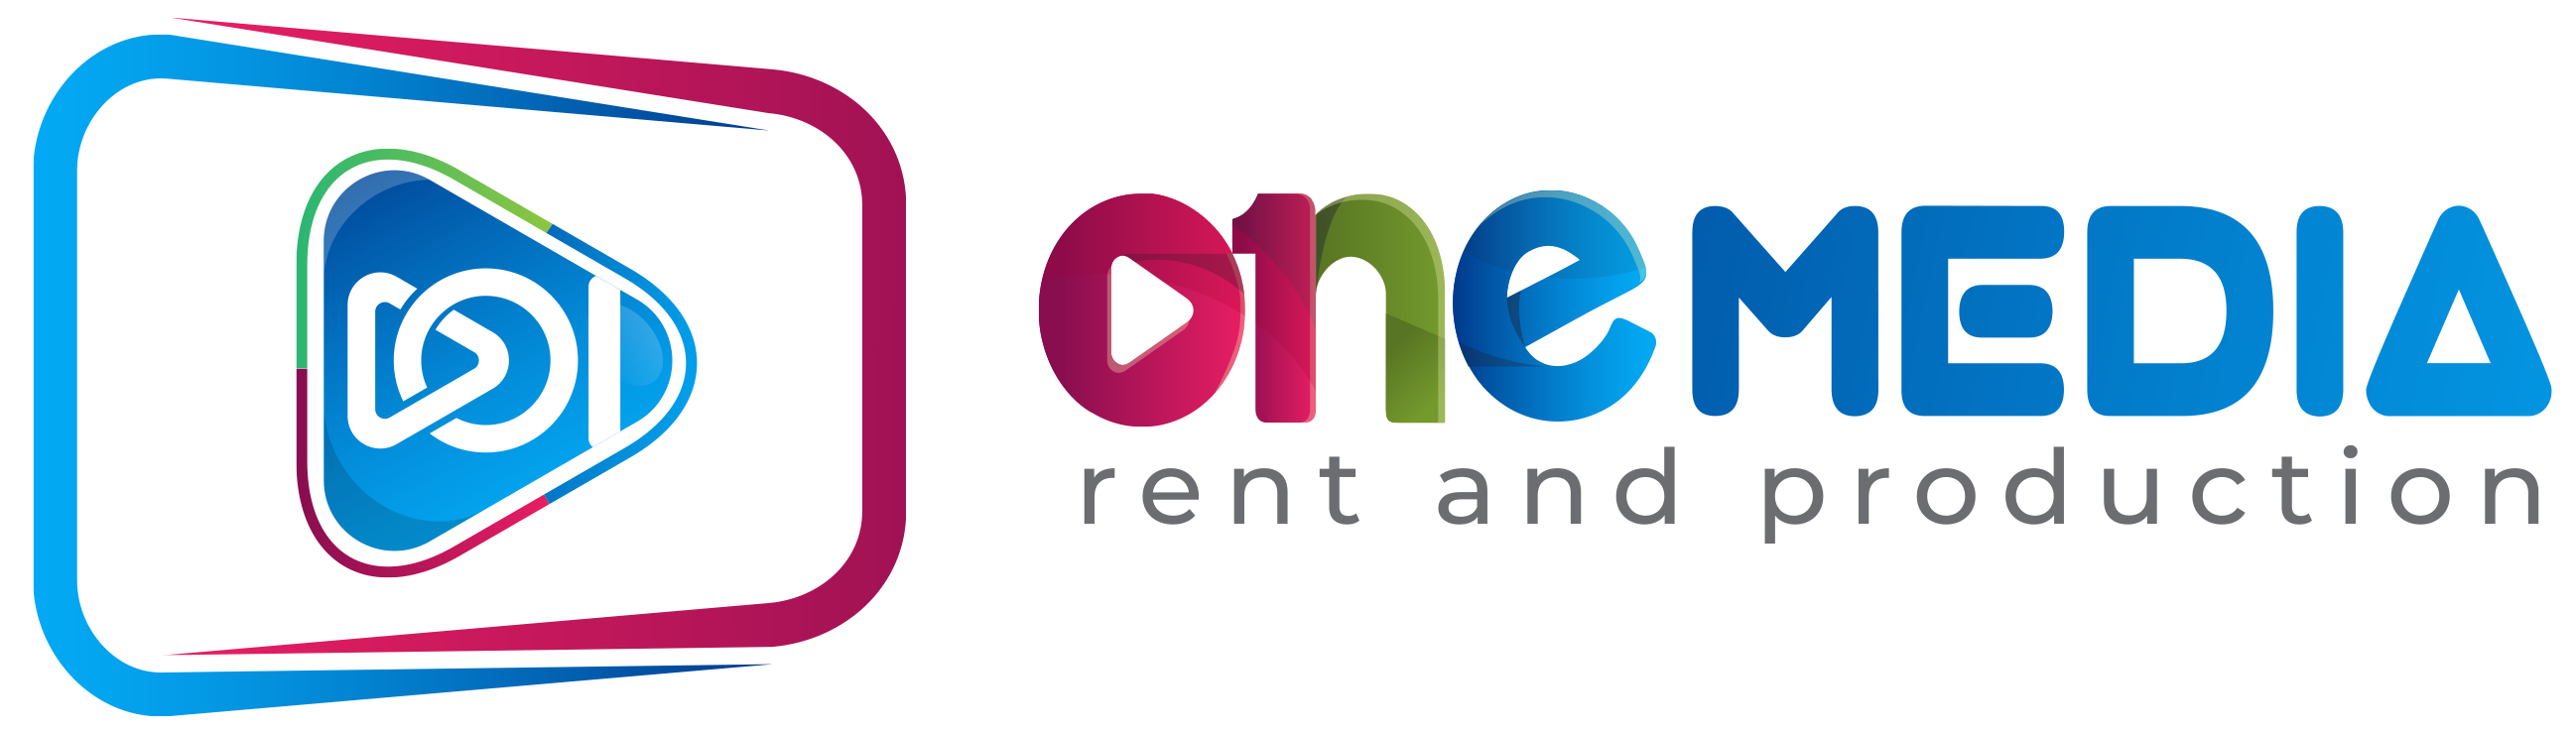 One Media Rent & Productions